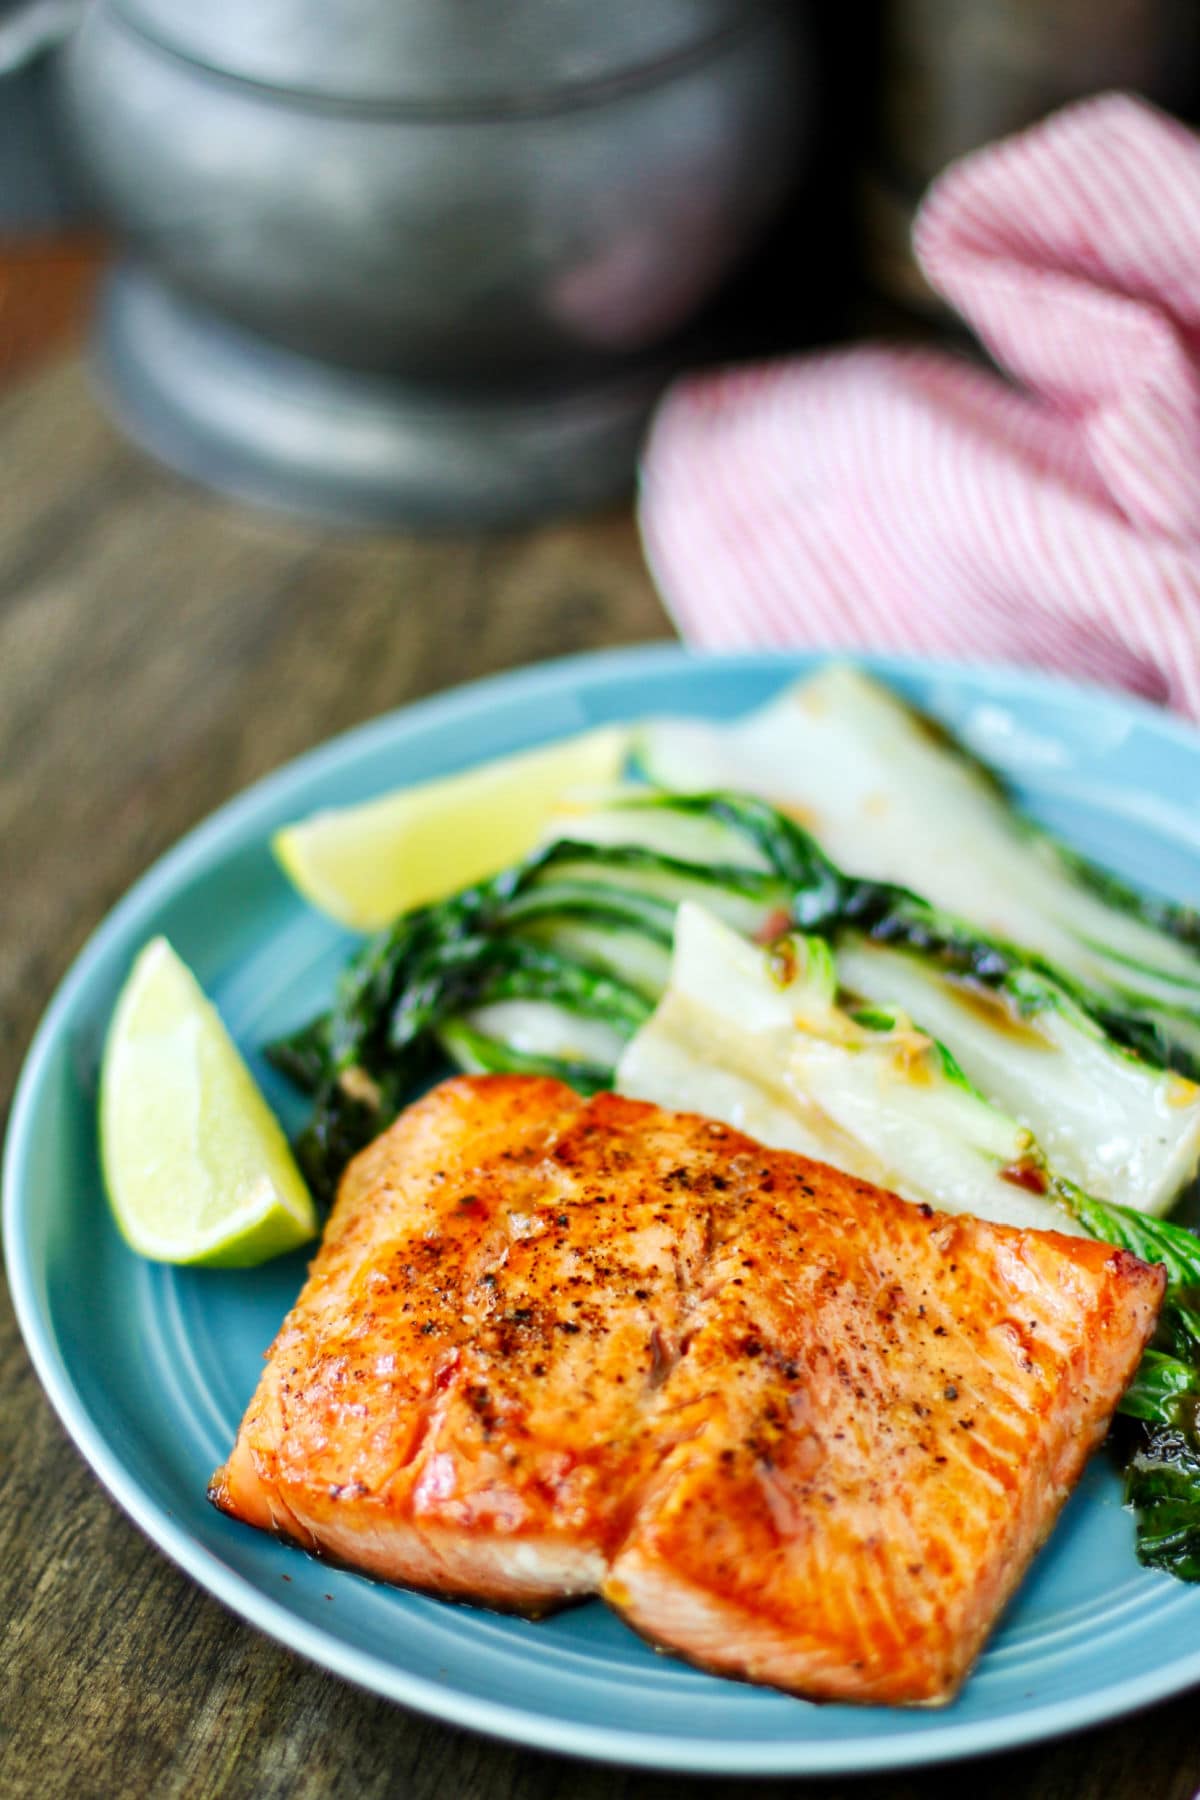 Chili-Glazed Salmon for Two with bok choy